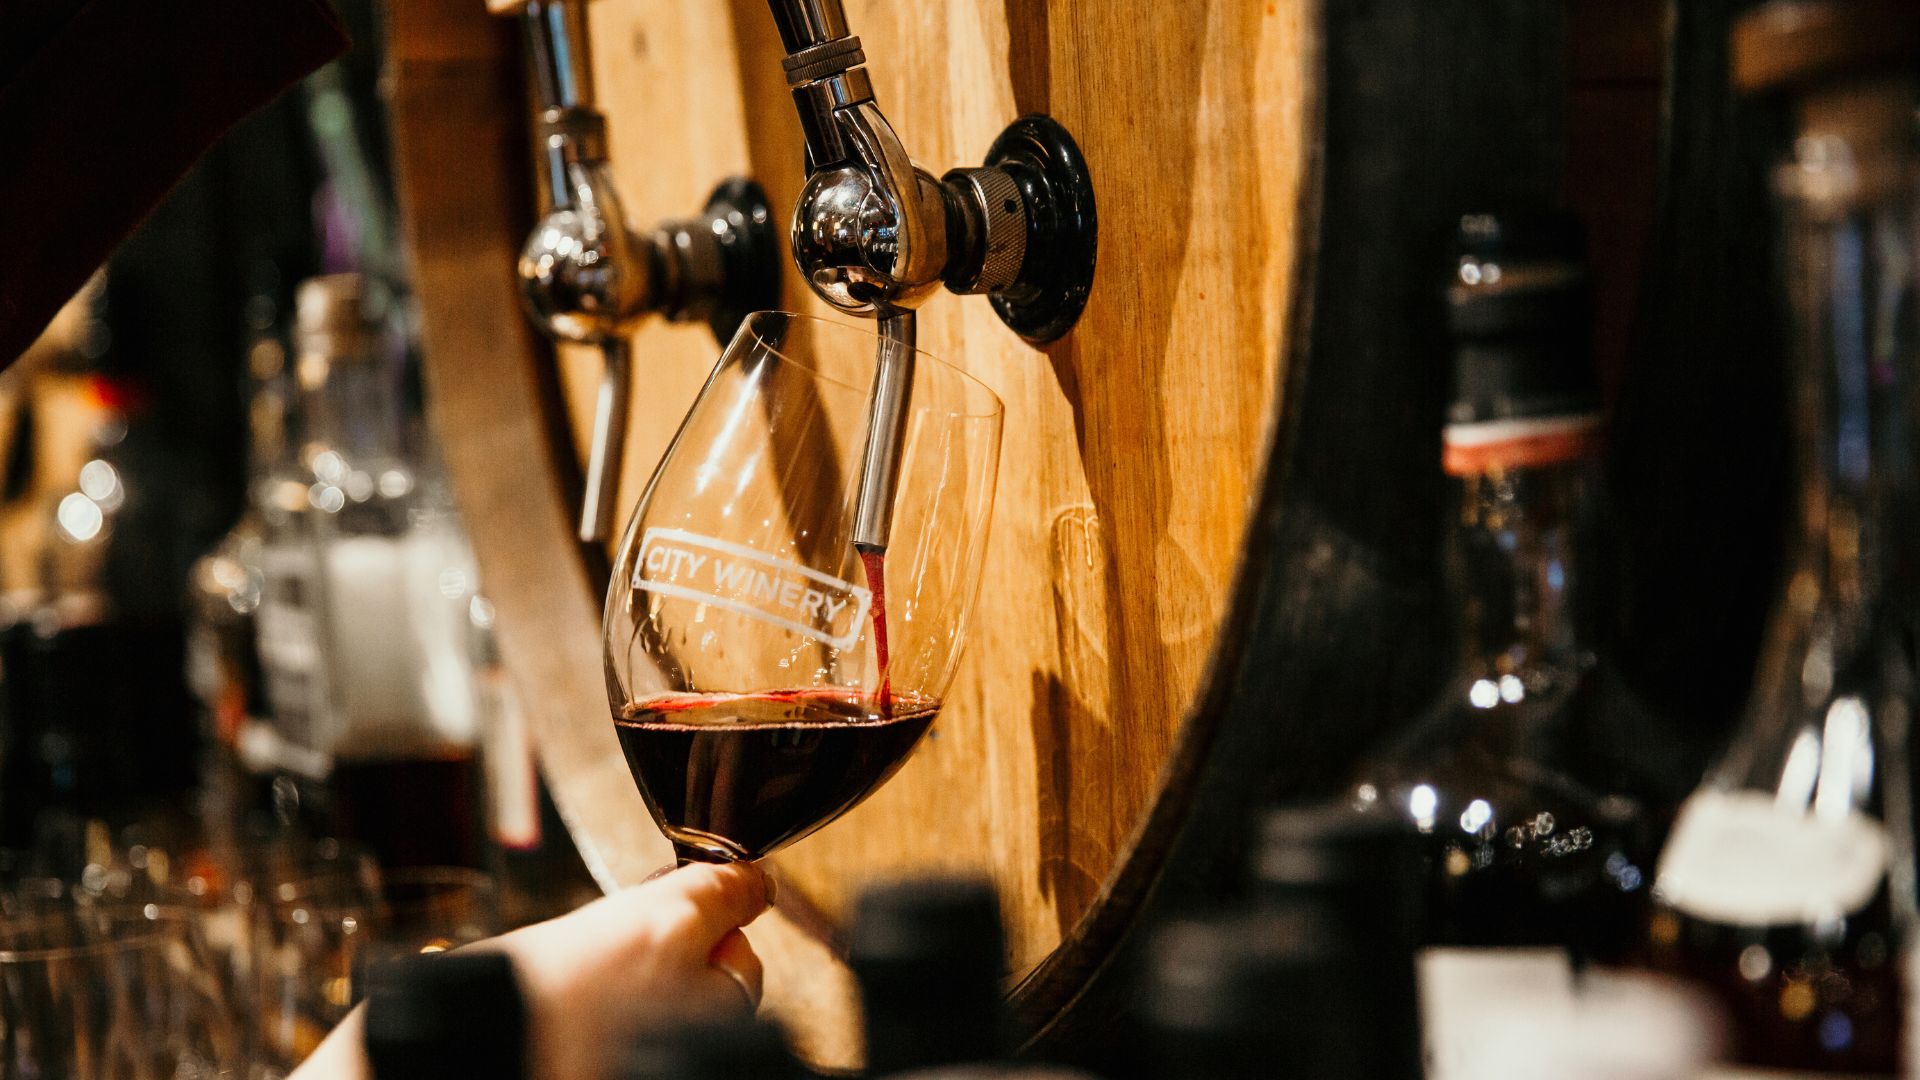 City Winery serves housemade wines on tap.